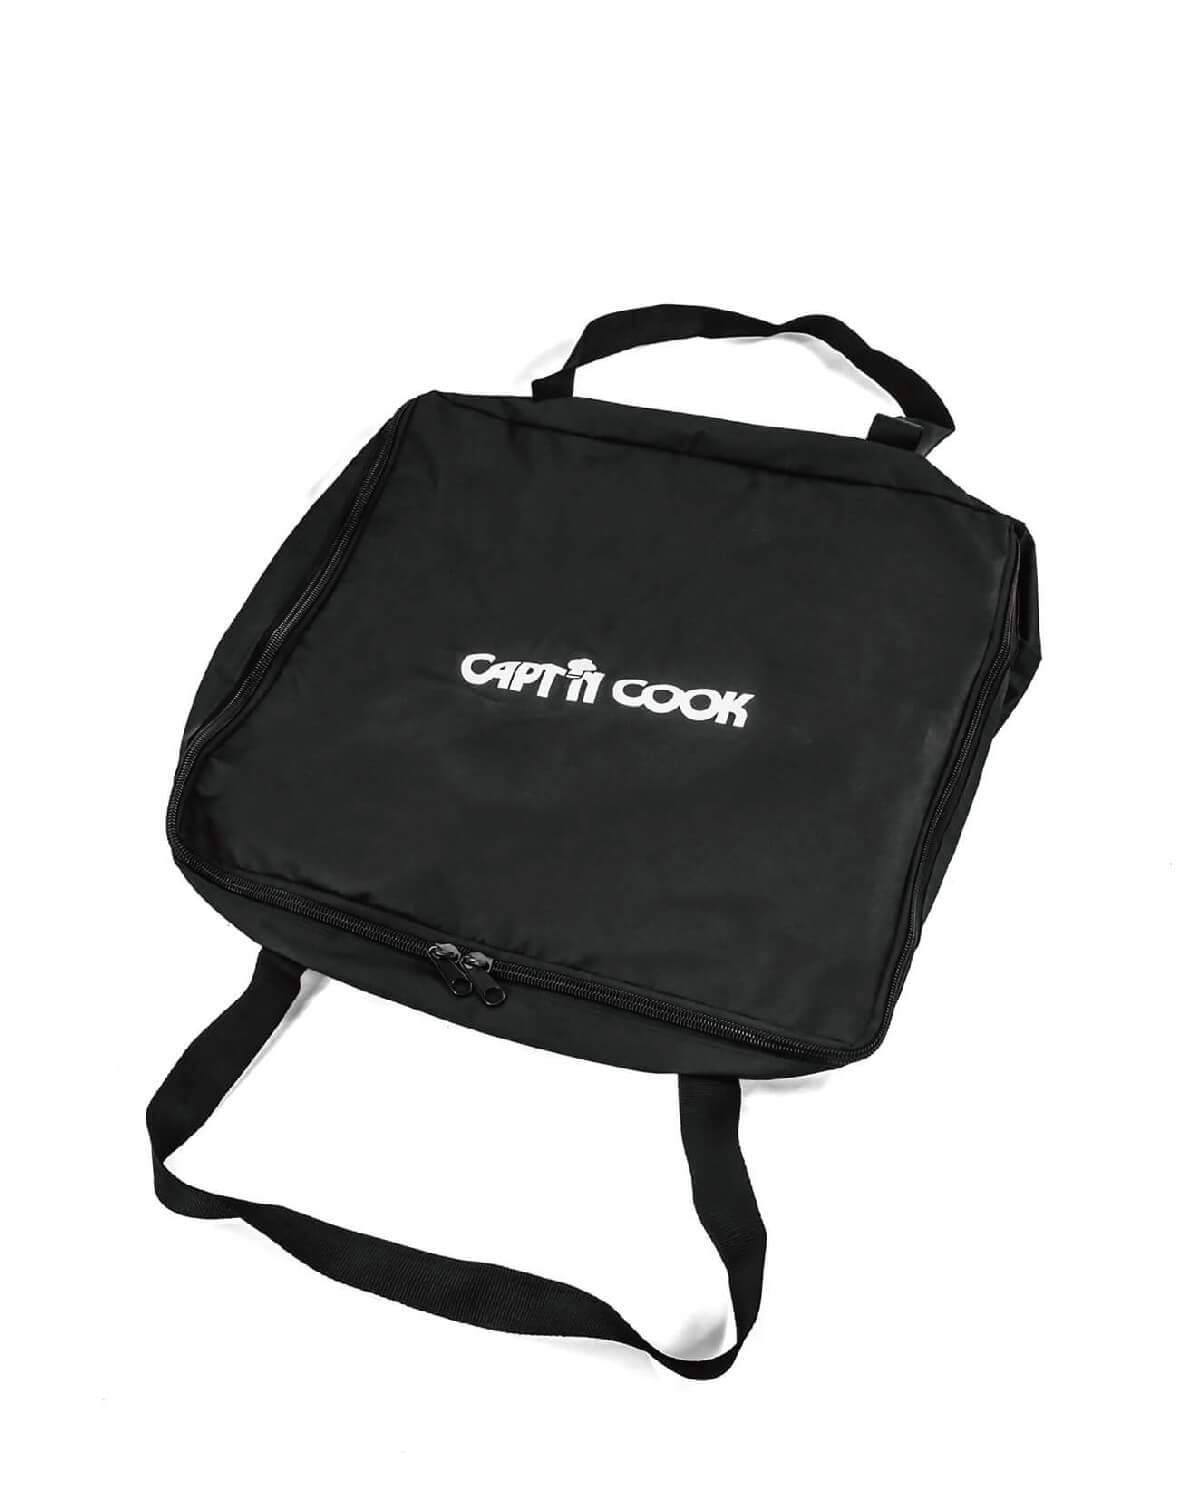 OvenPlus Carry Bag